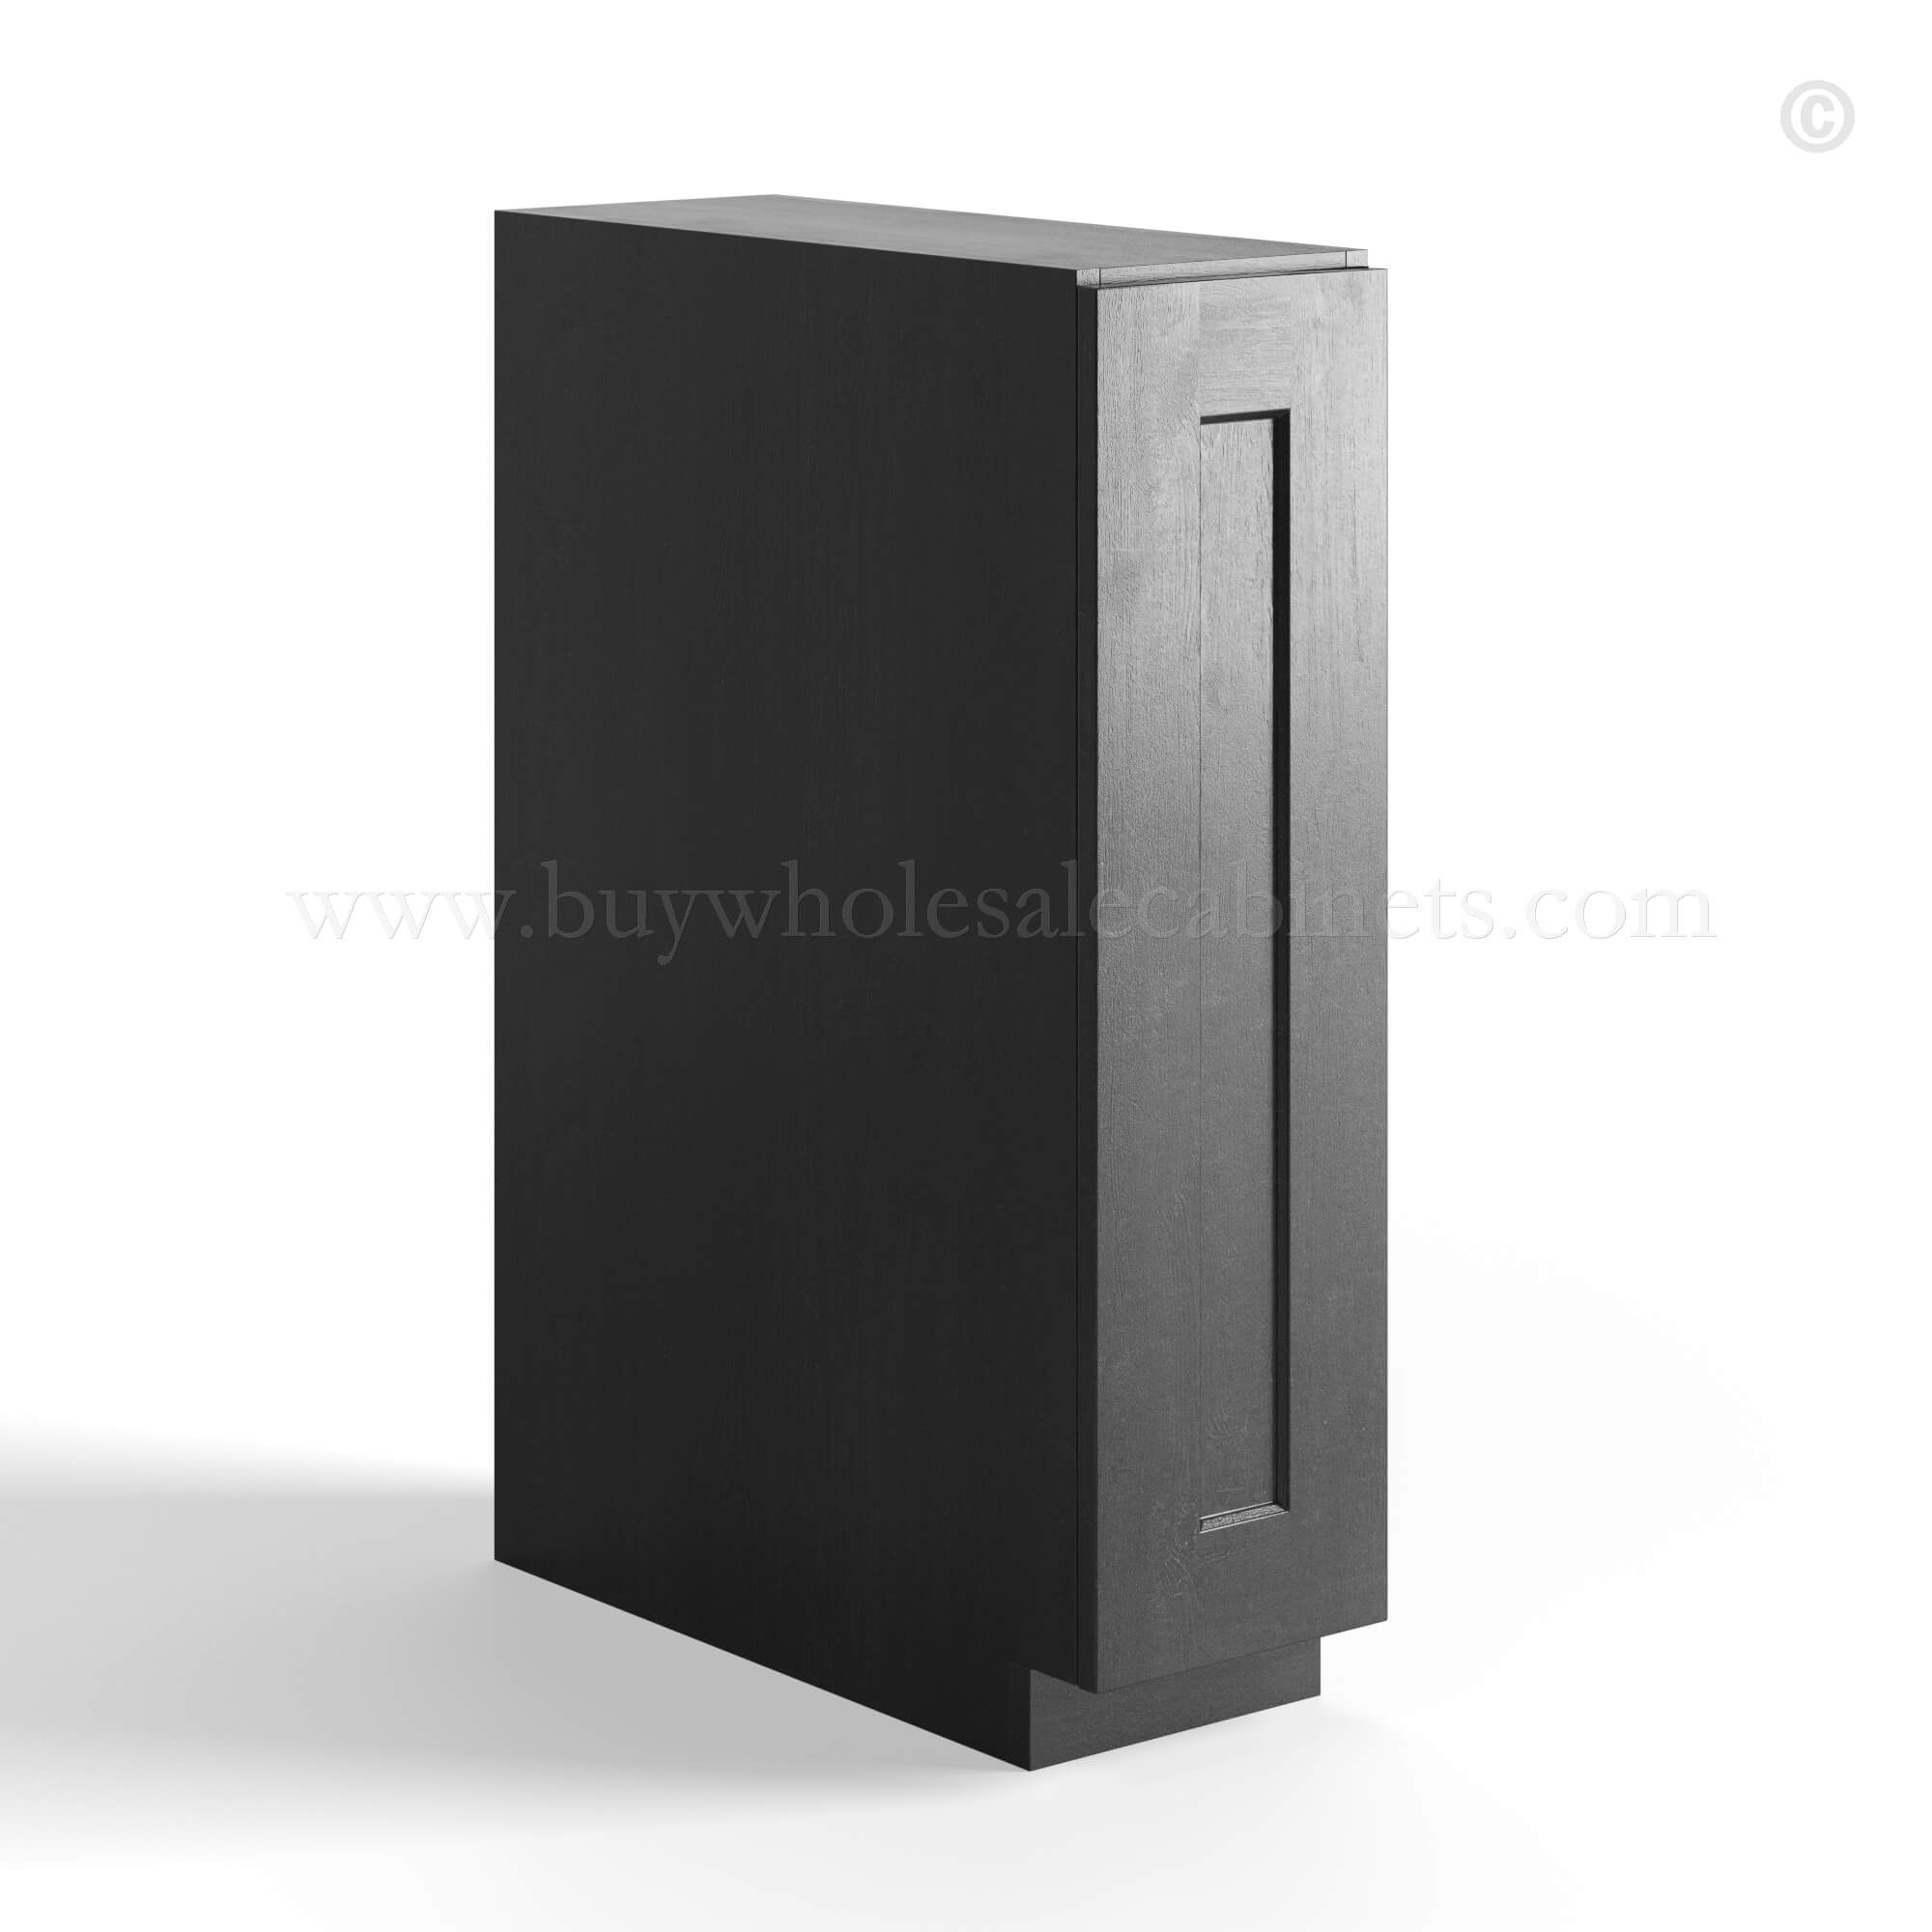 charcoal black shaker base spice rack cabinet with single door closed, rta cabinets, wholesale cabinets